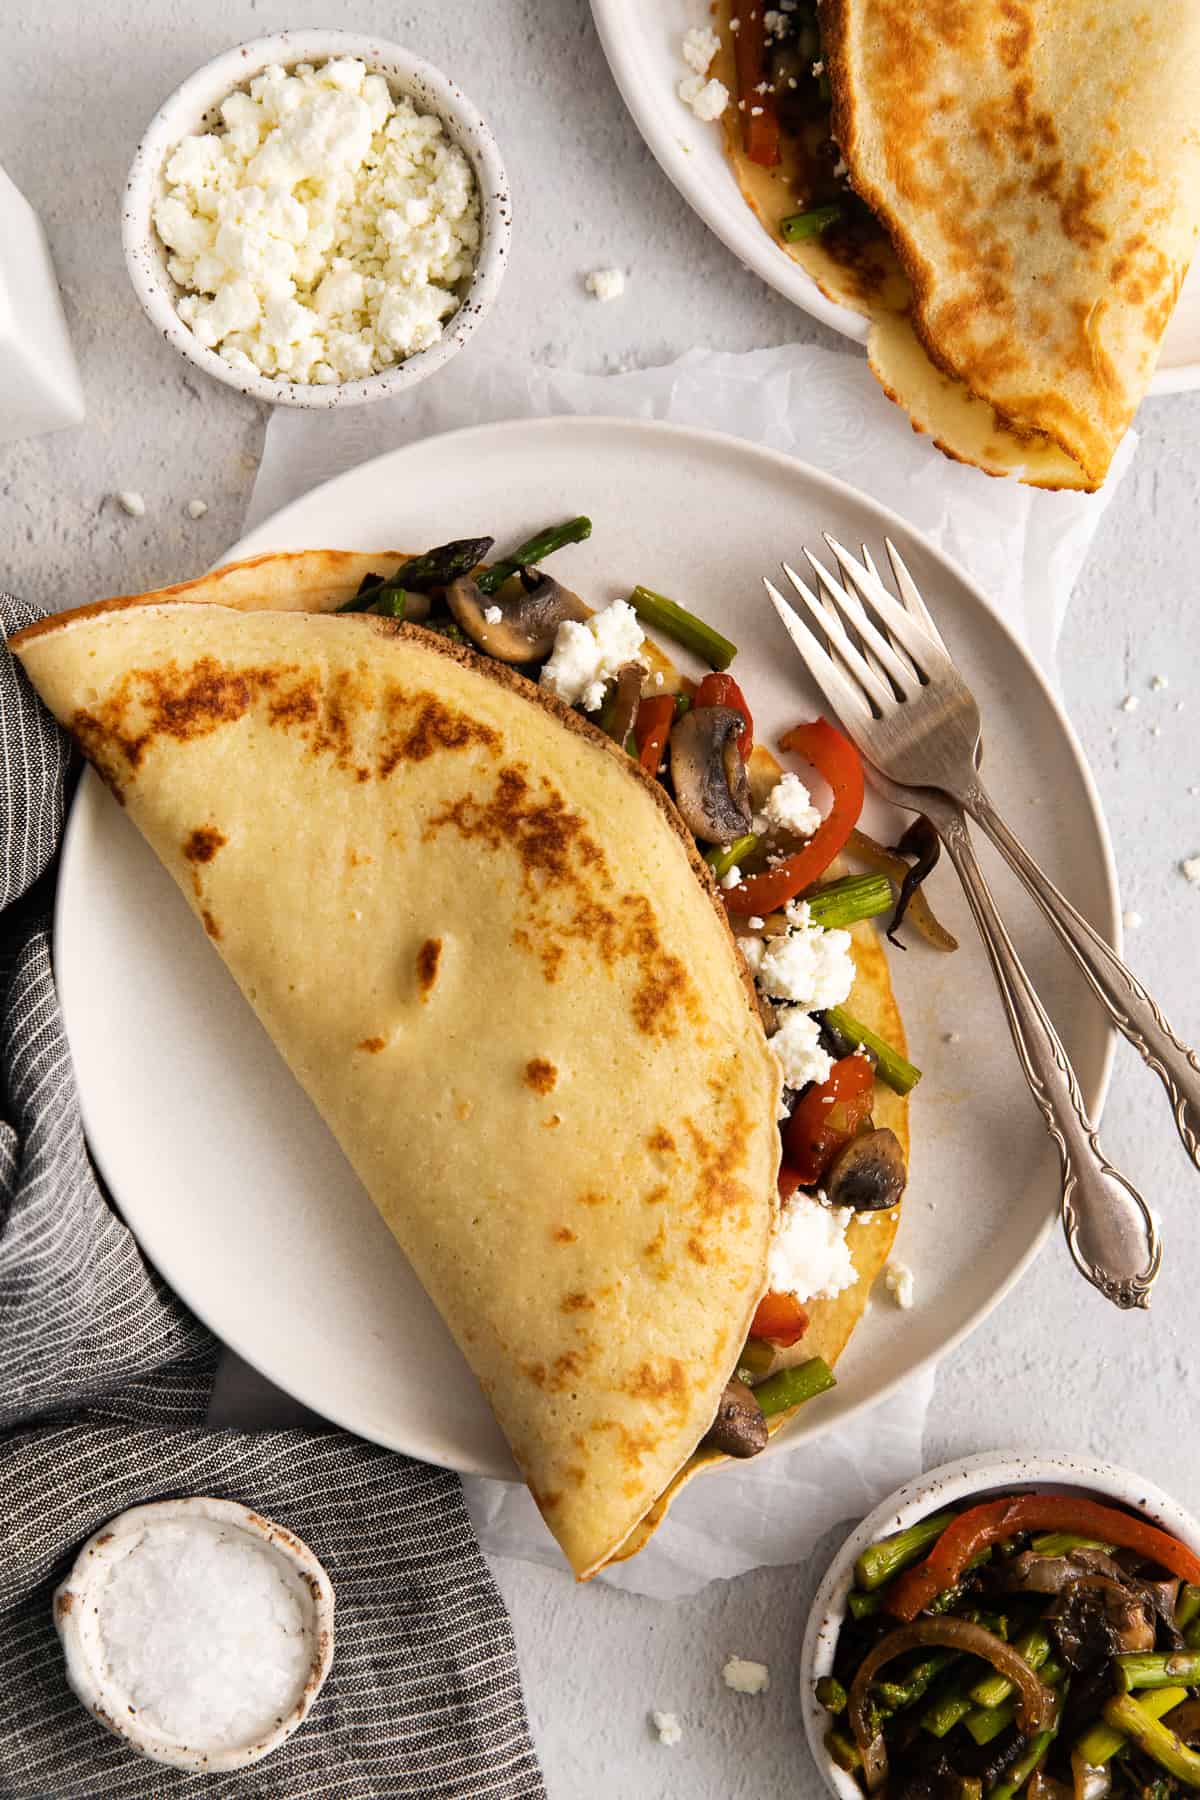 Goat cheese crepe on a plate.